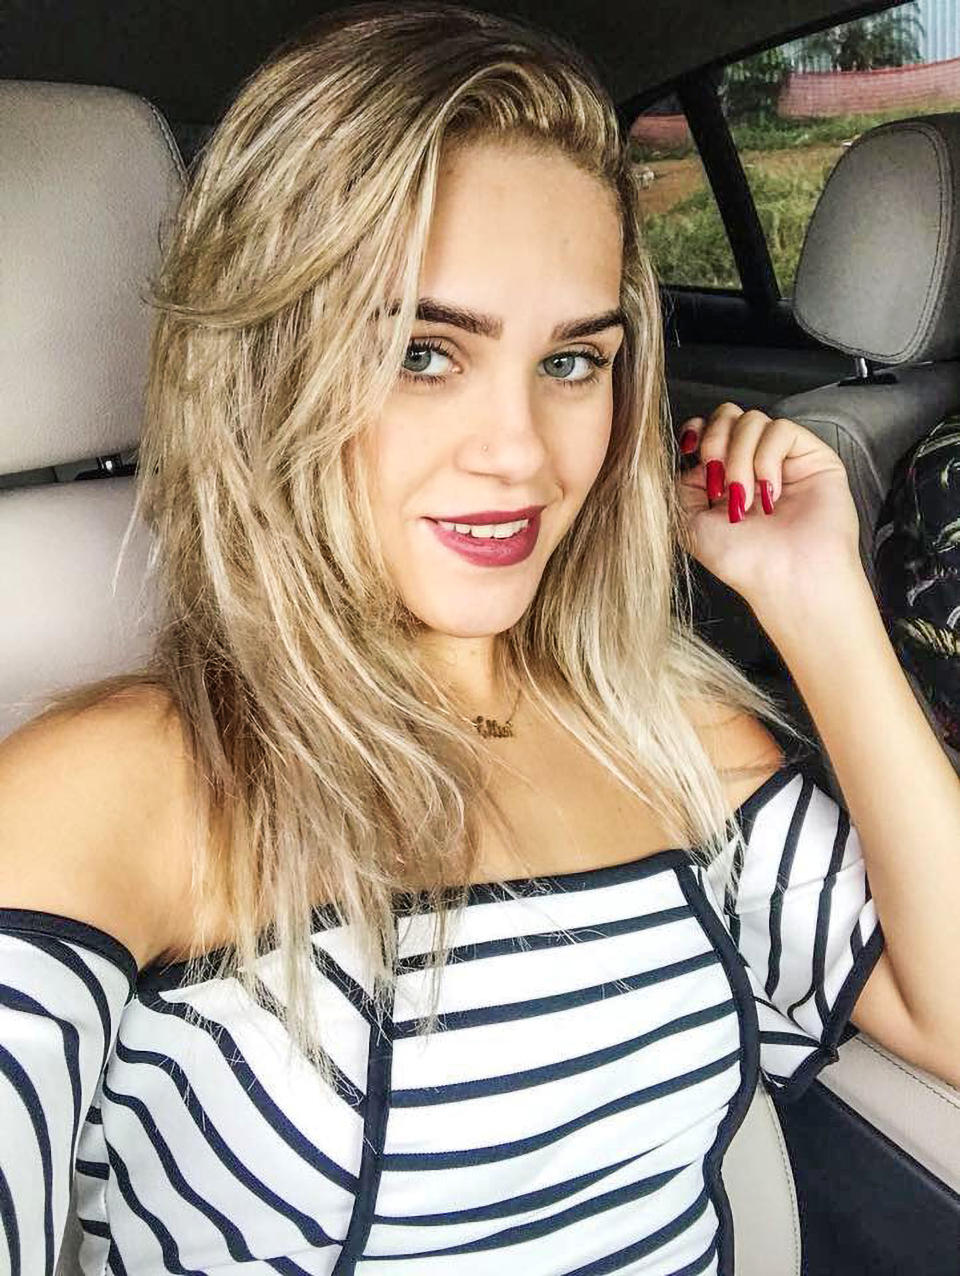 Several people have been arrested in connection to the death of Ellen Priscila Ferreira da Silva (pictured). Source: Newsflash/Australscope